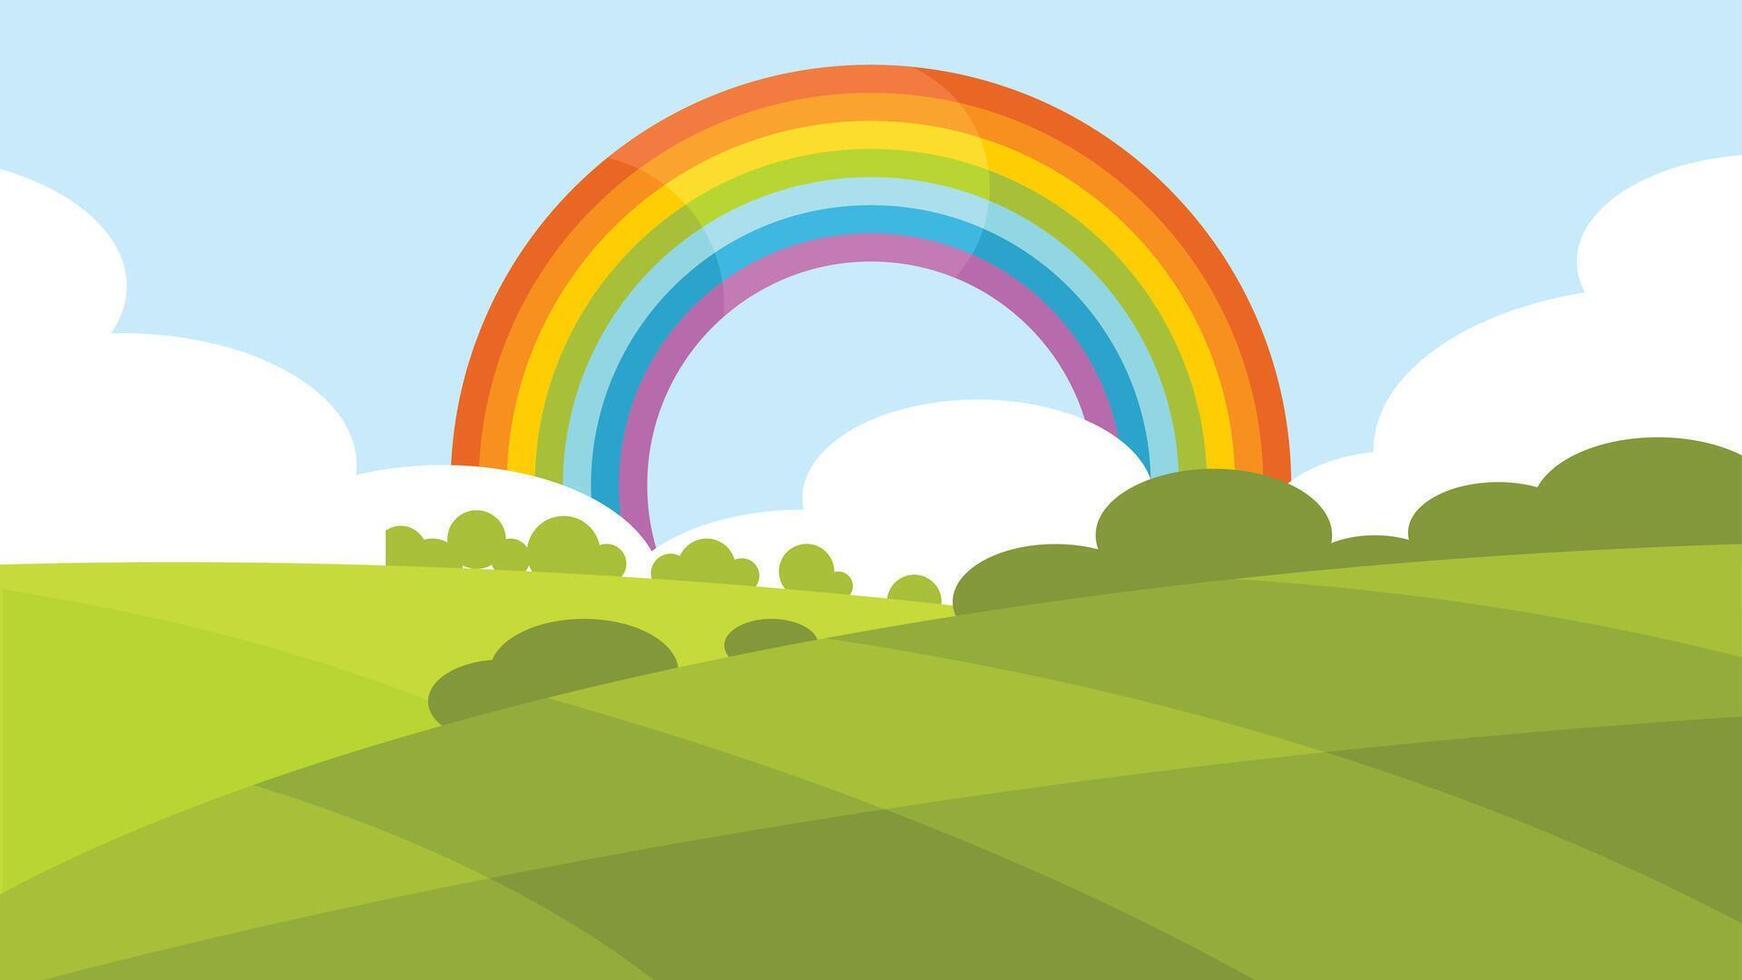 Nature scene rainbow with clouds and green fields vector